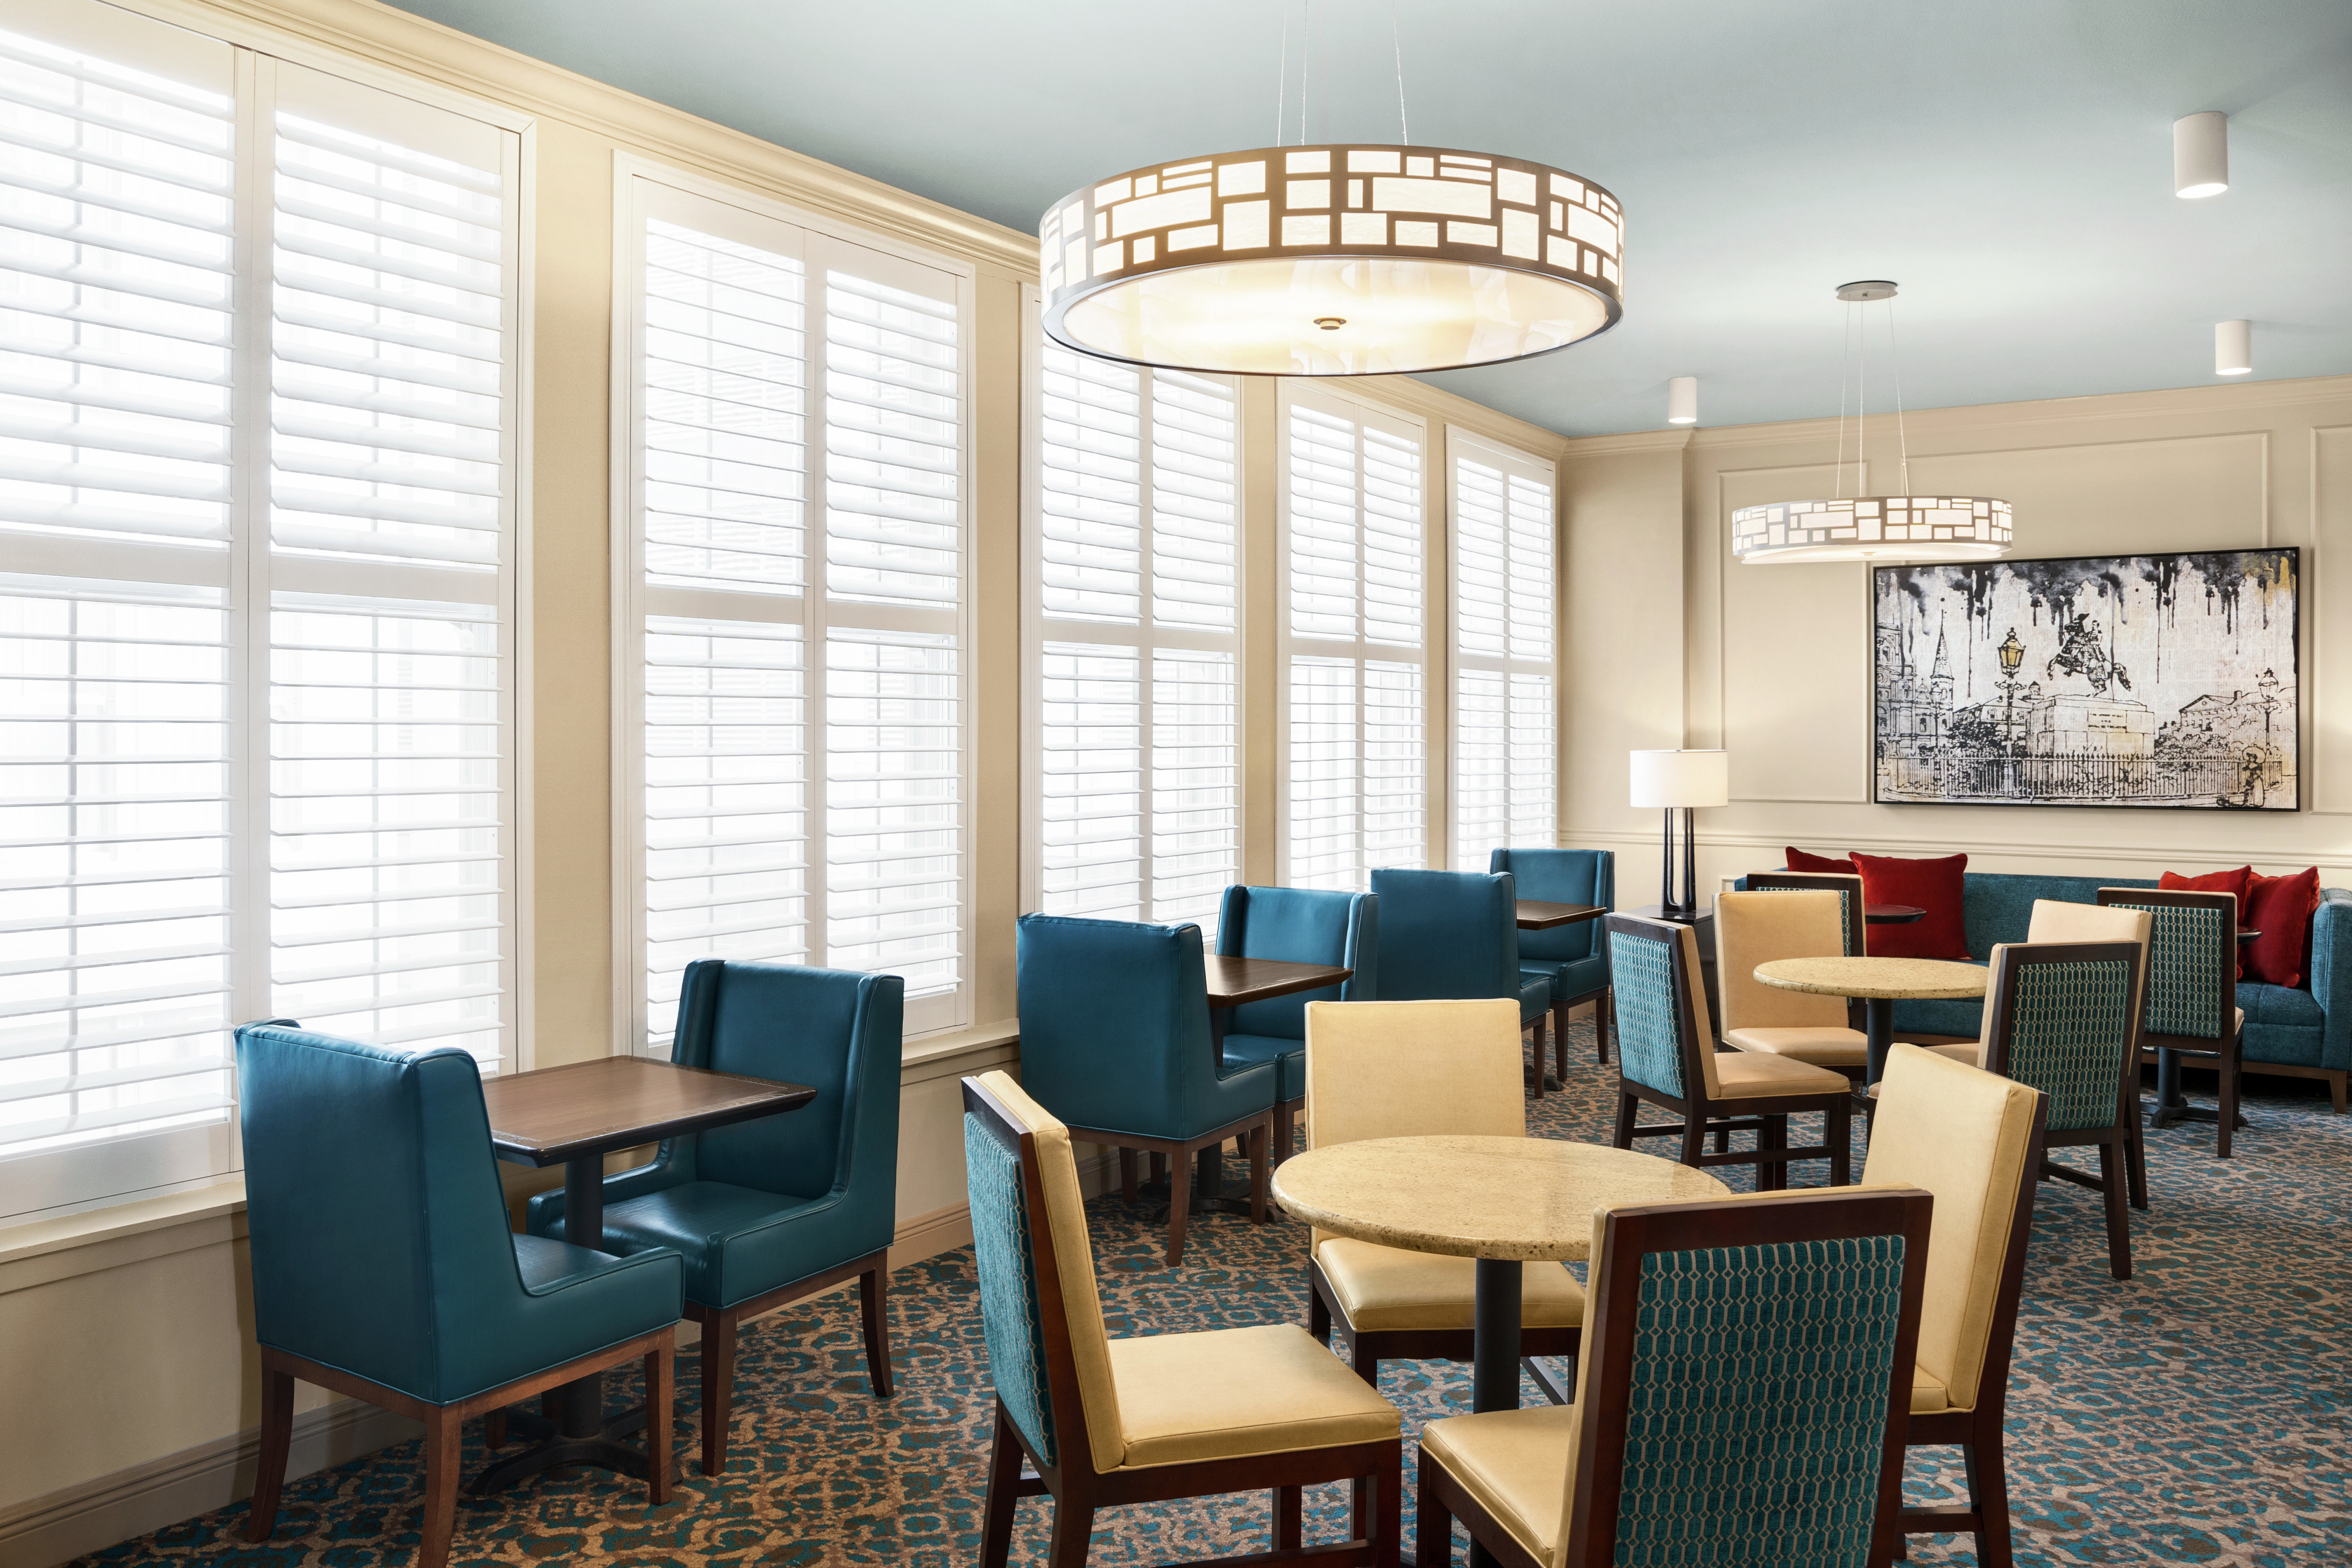 Bright breakfast area with ample seating.